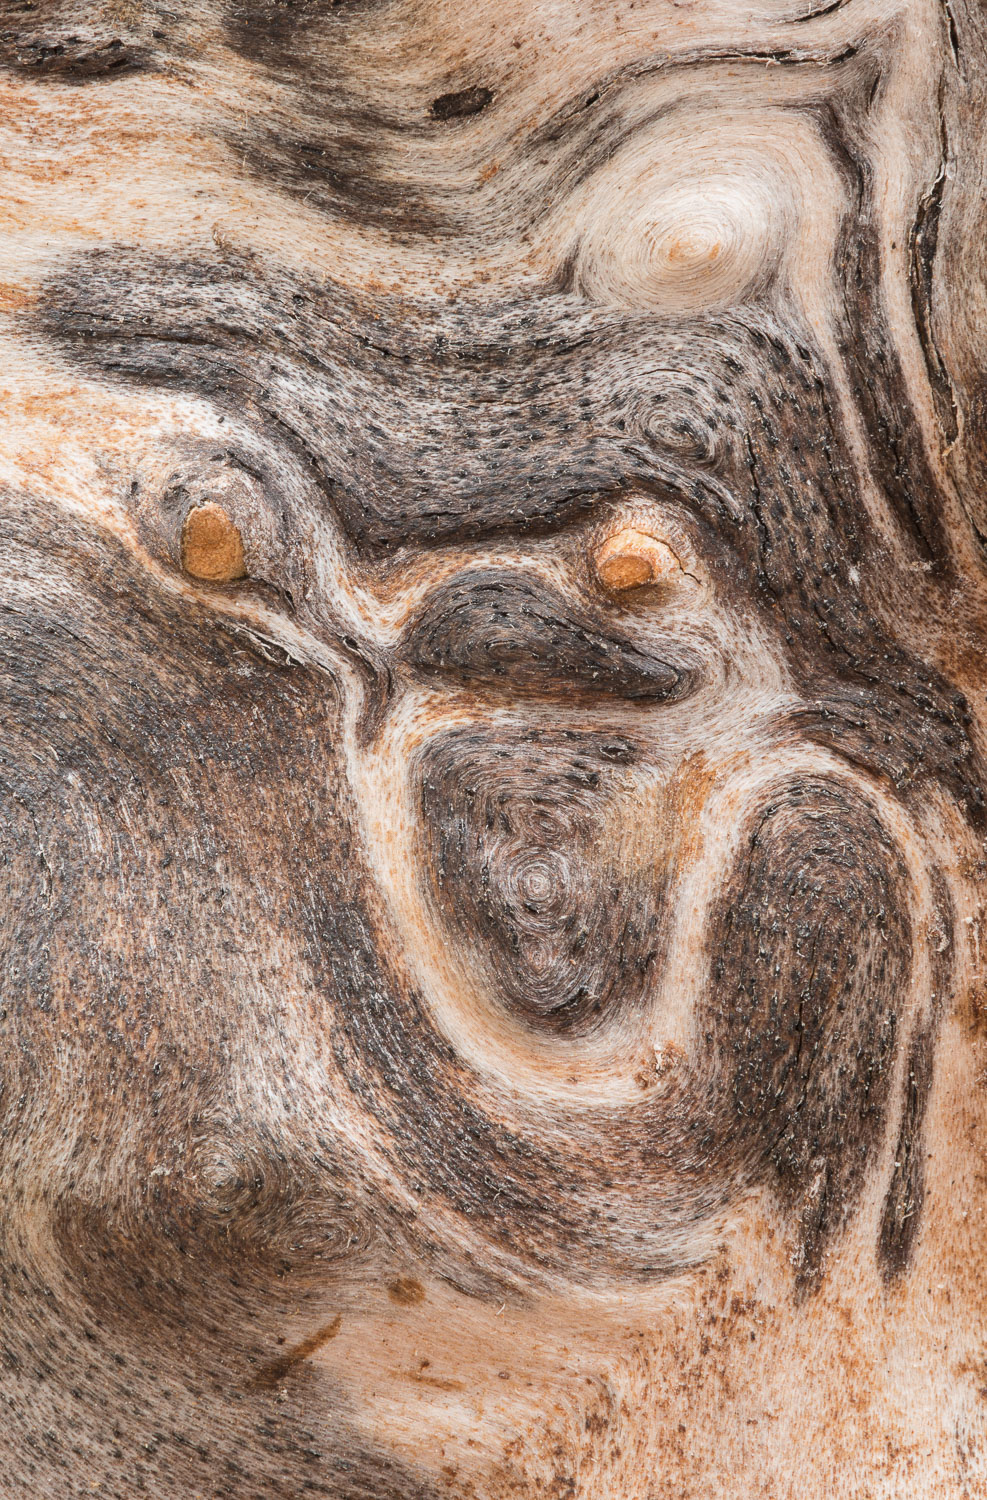 Close-up of the woodgrain patterns in a weathered apple tree log. Image #2951